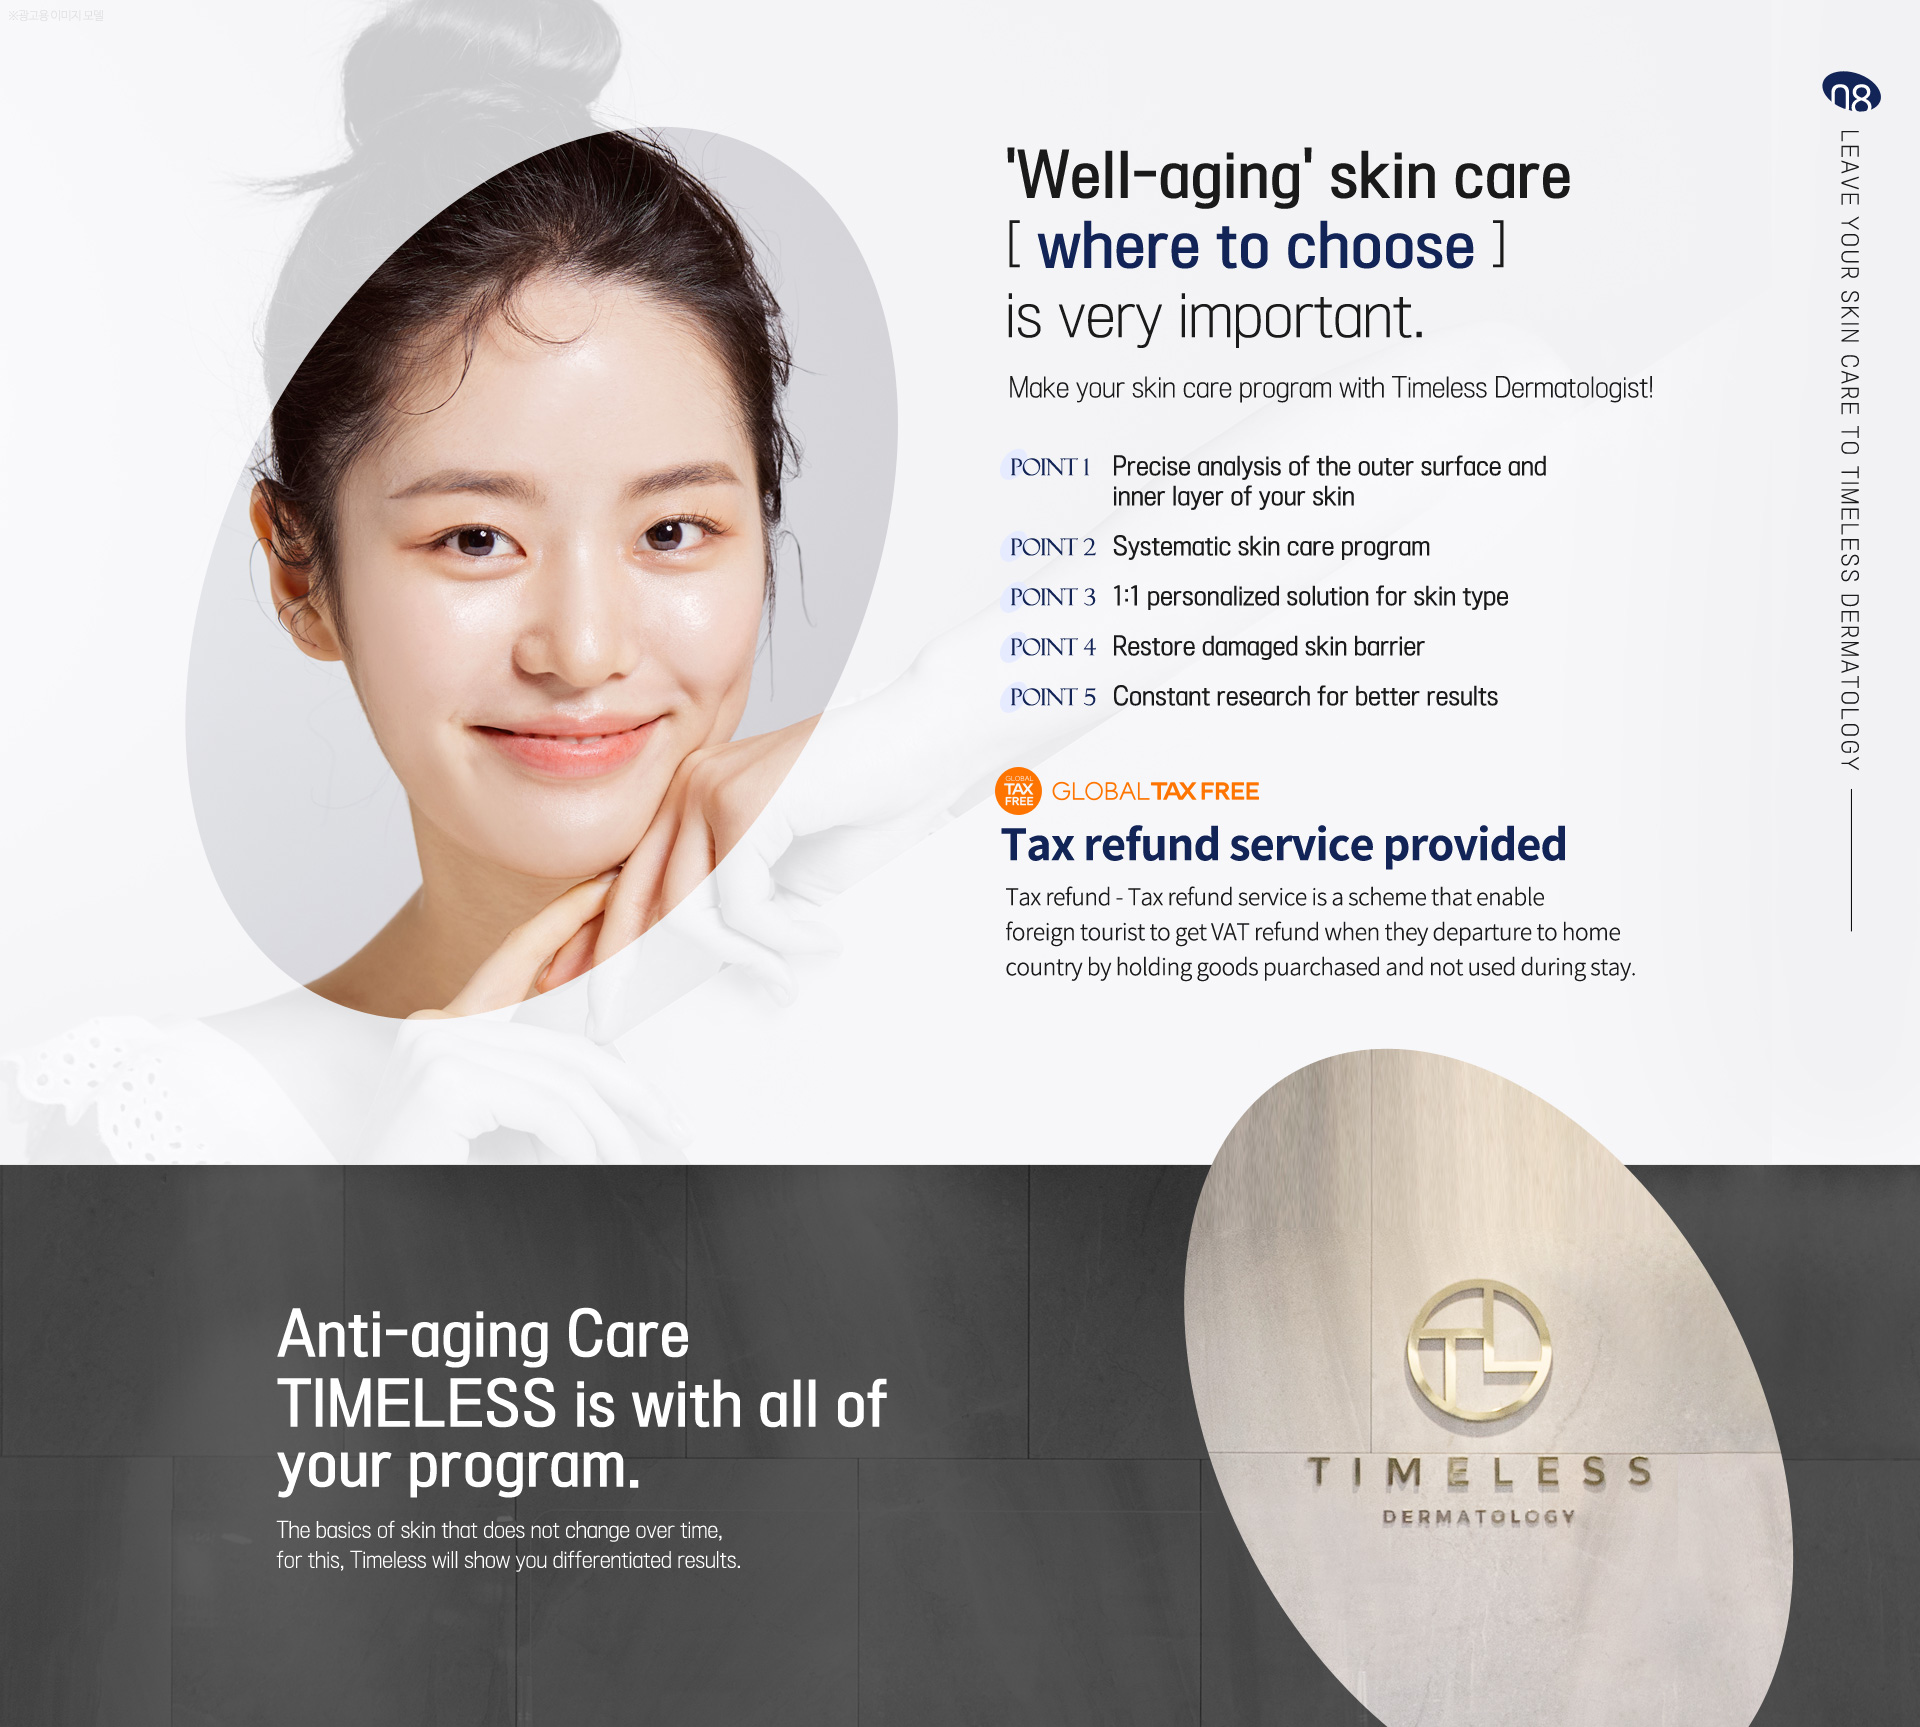 Leave your skin care to timeless dermatology